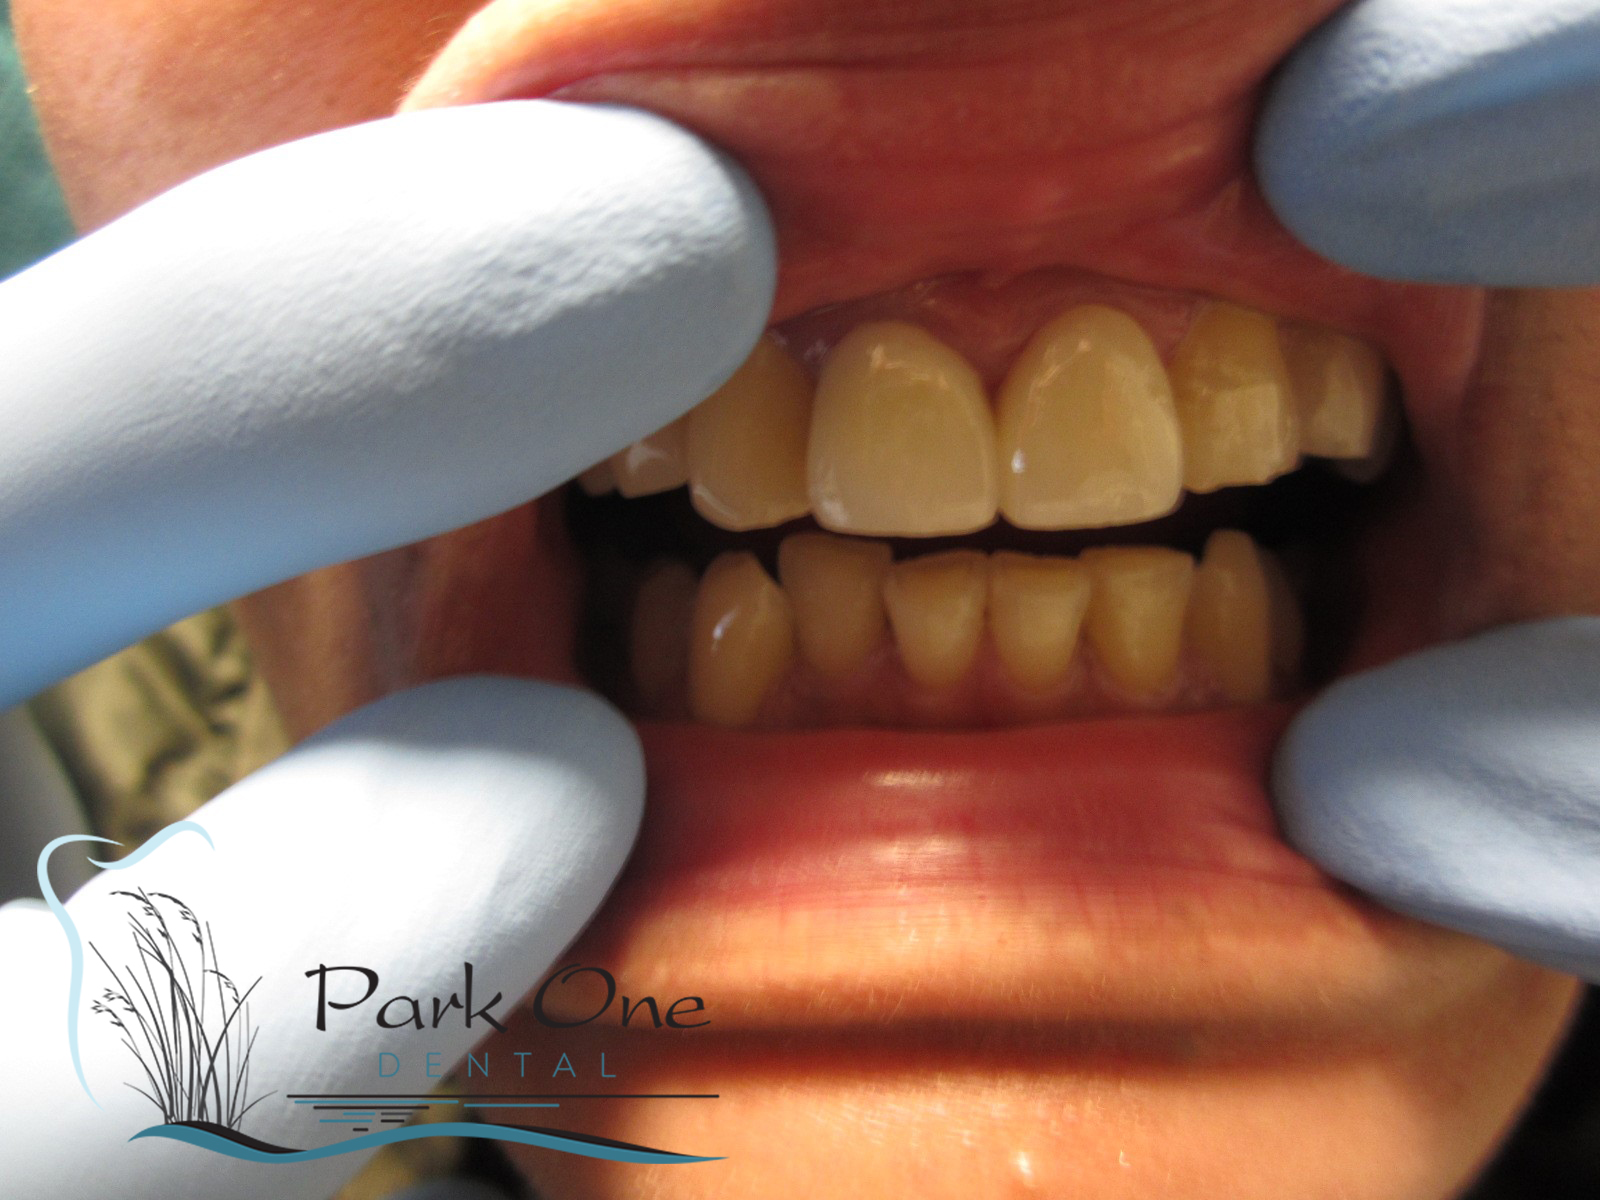 Garden City Before and After Teeth Whitening